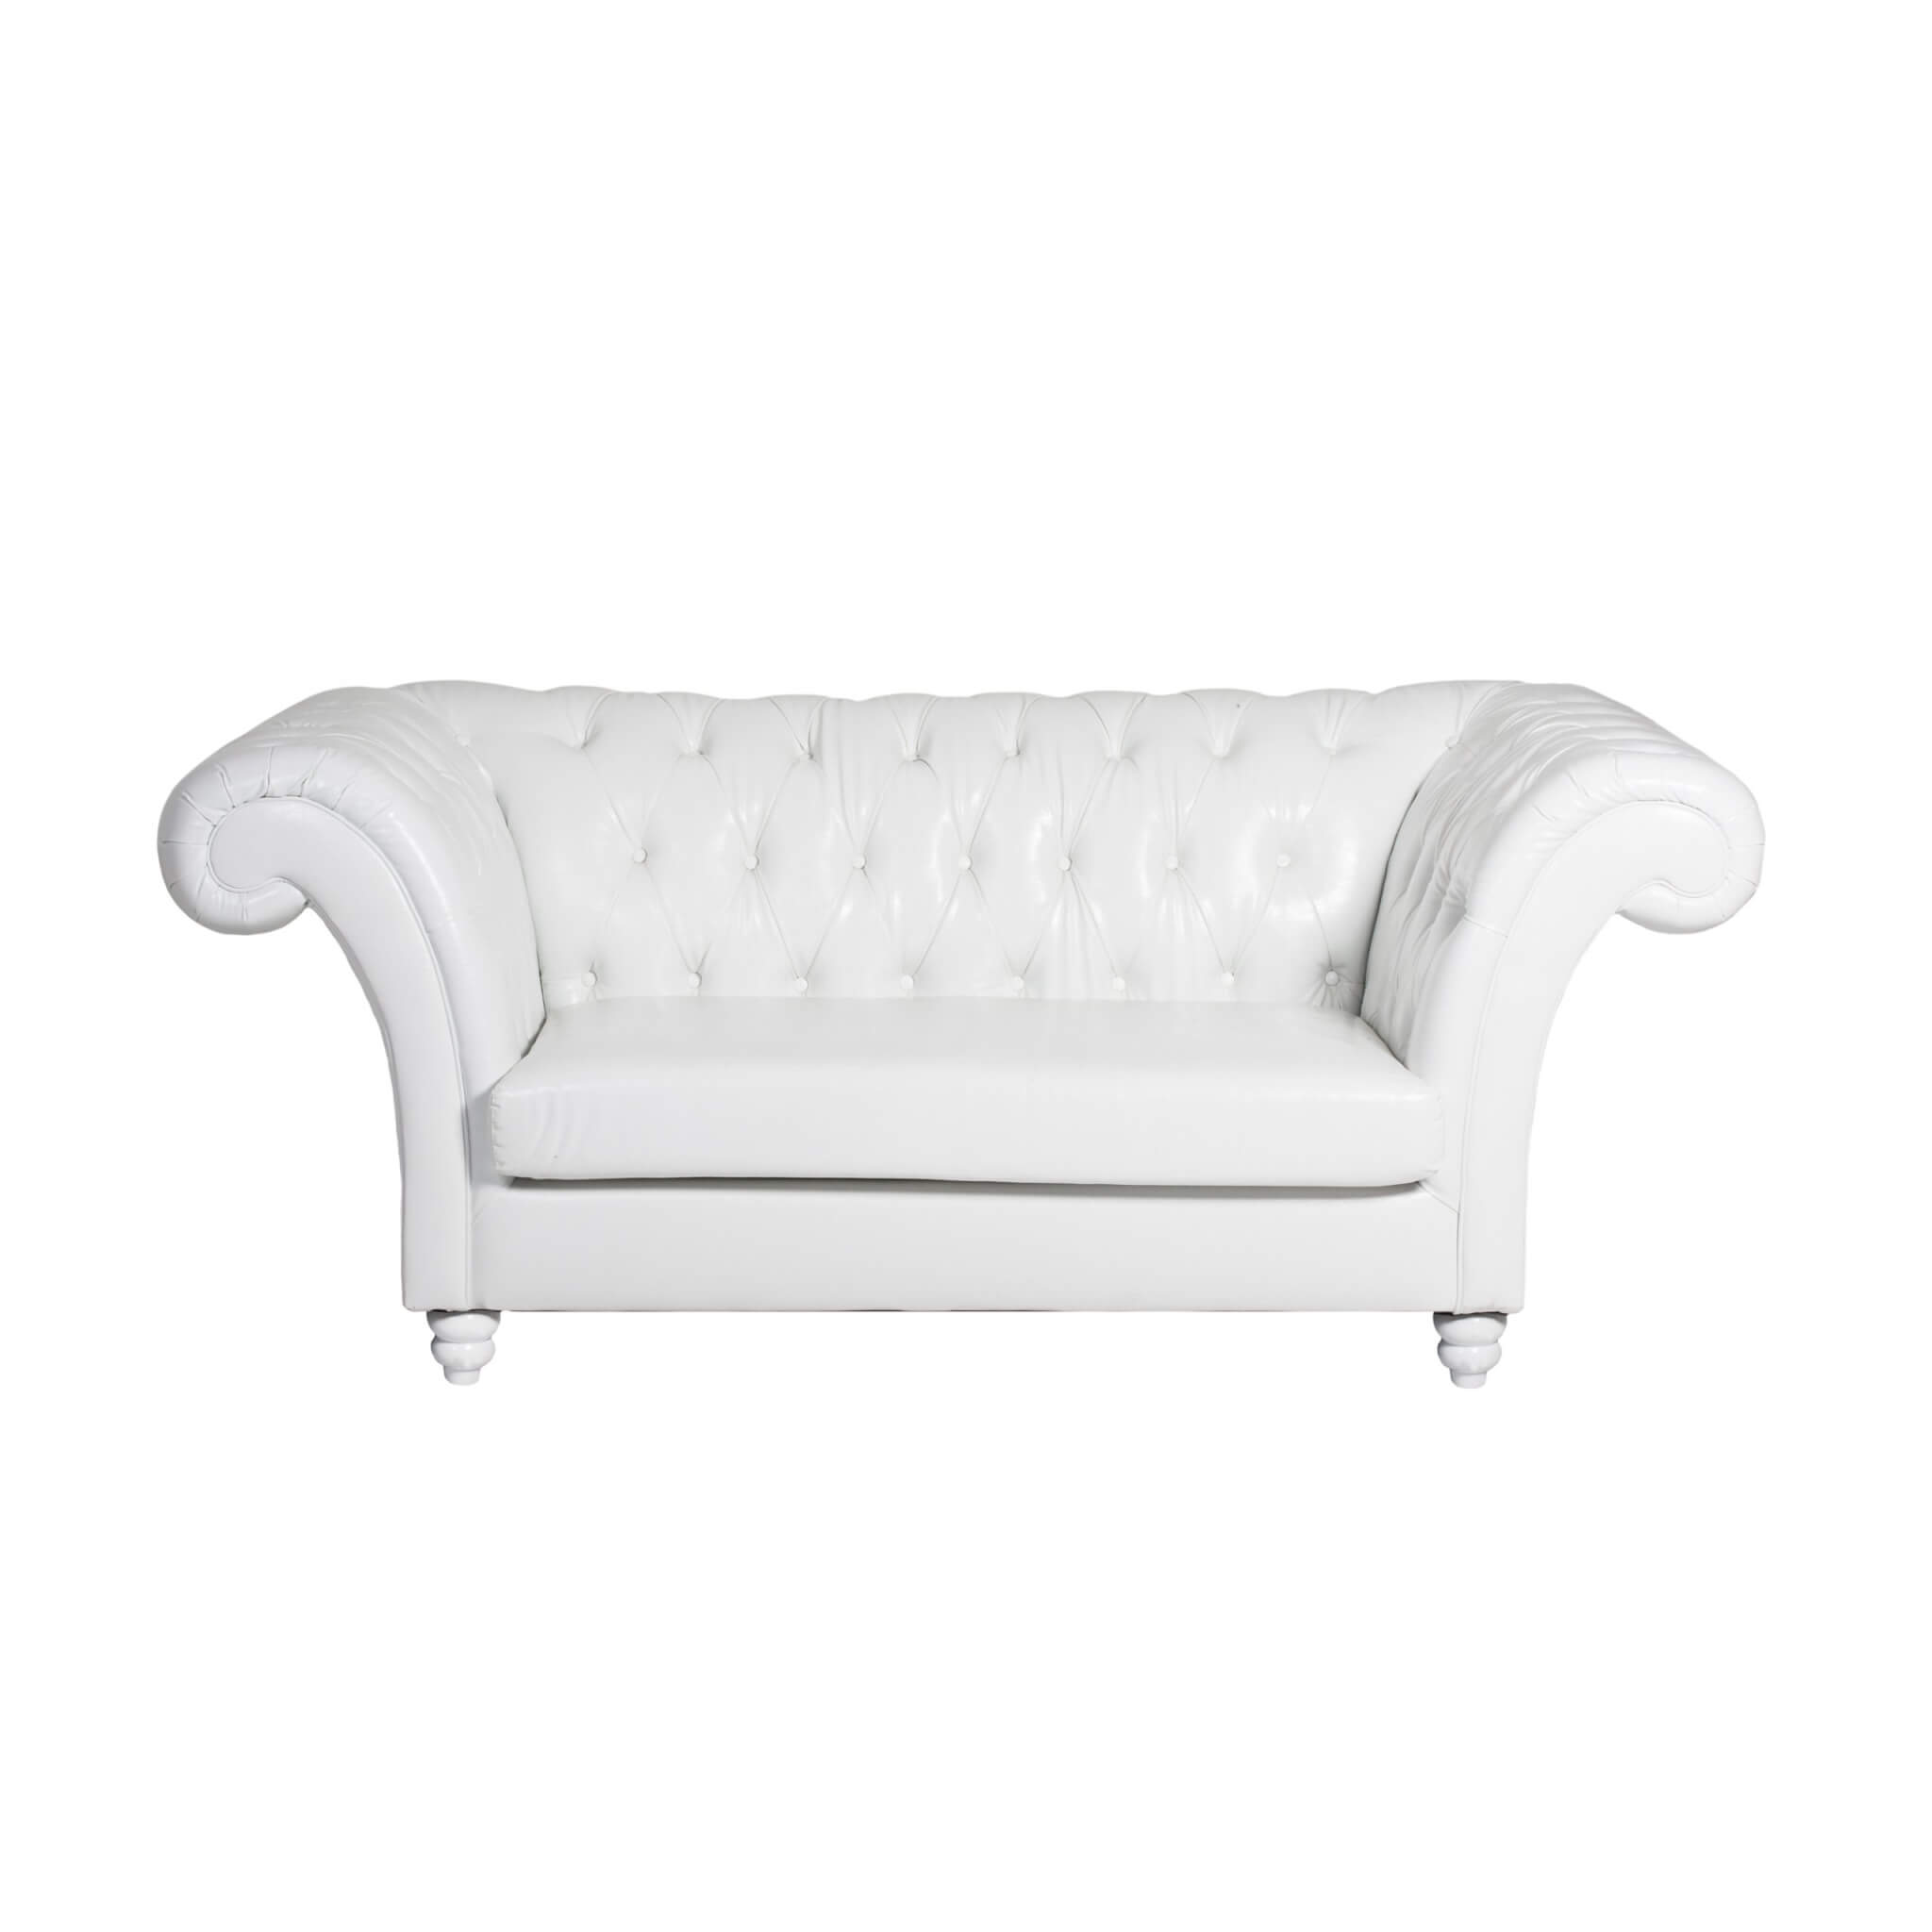 Versailles Two Seater Lounge – 200cmL x 108cmW x 80cmH